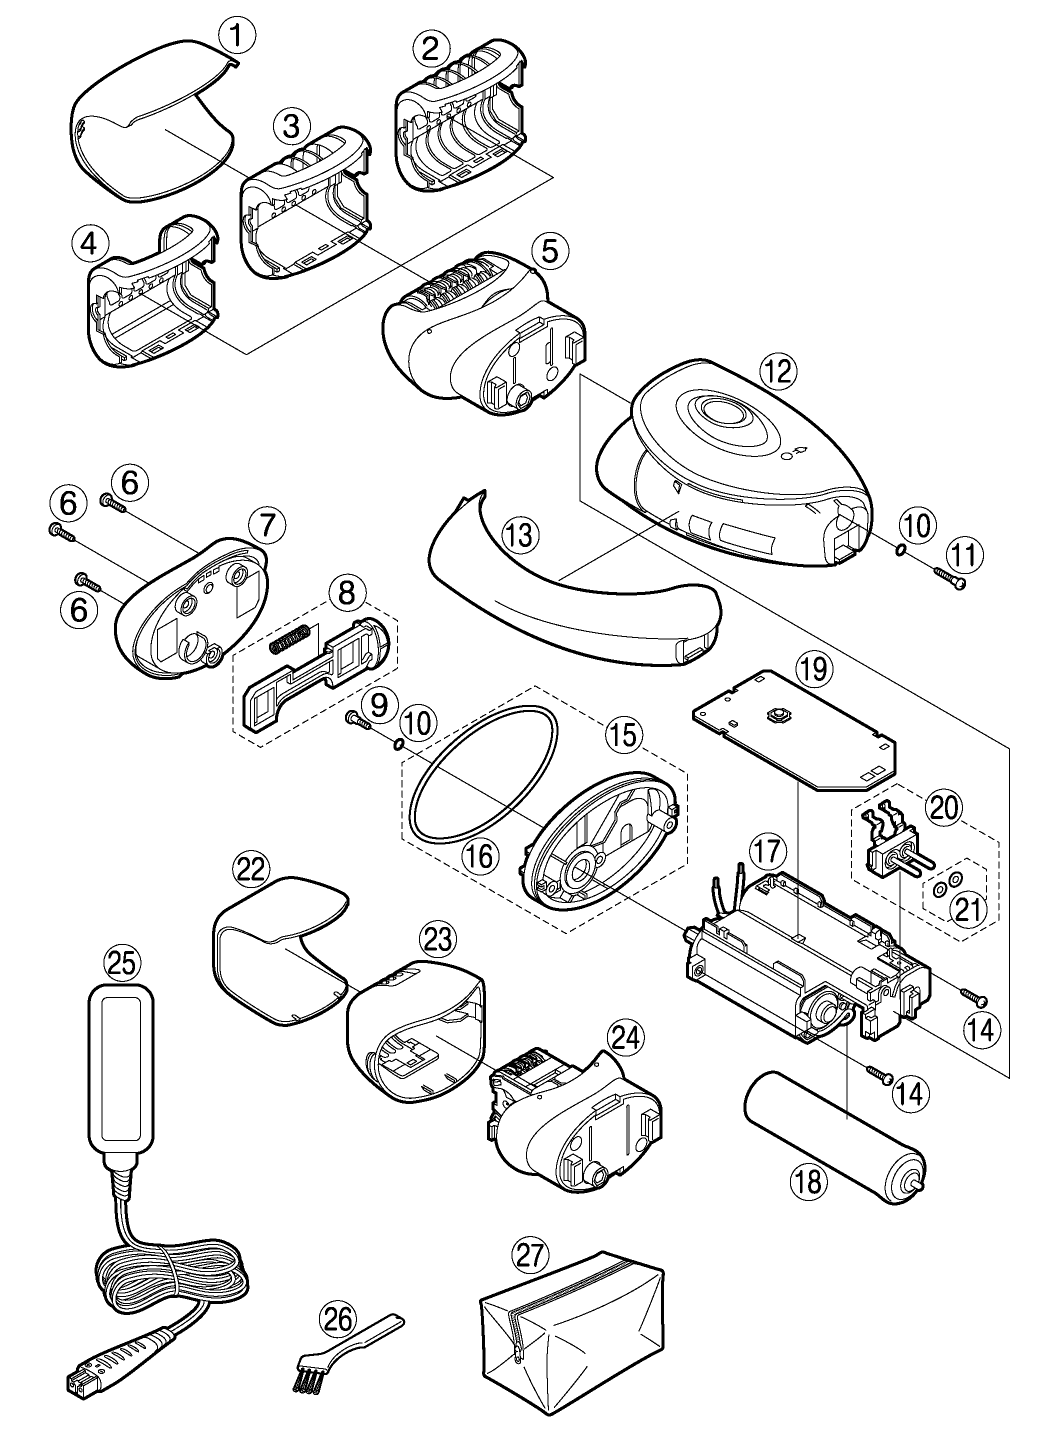 ES-WD60: Exploded View